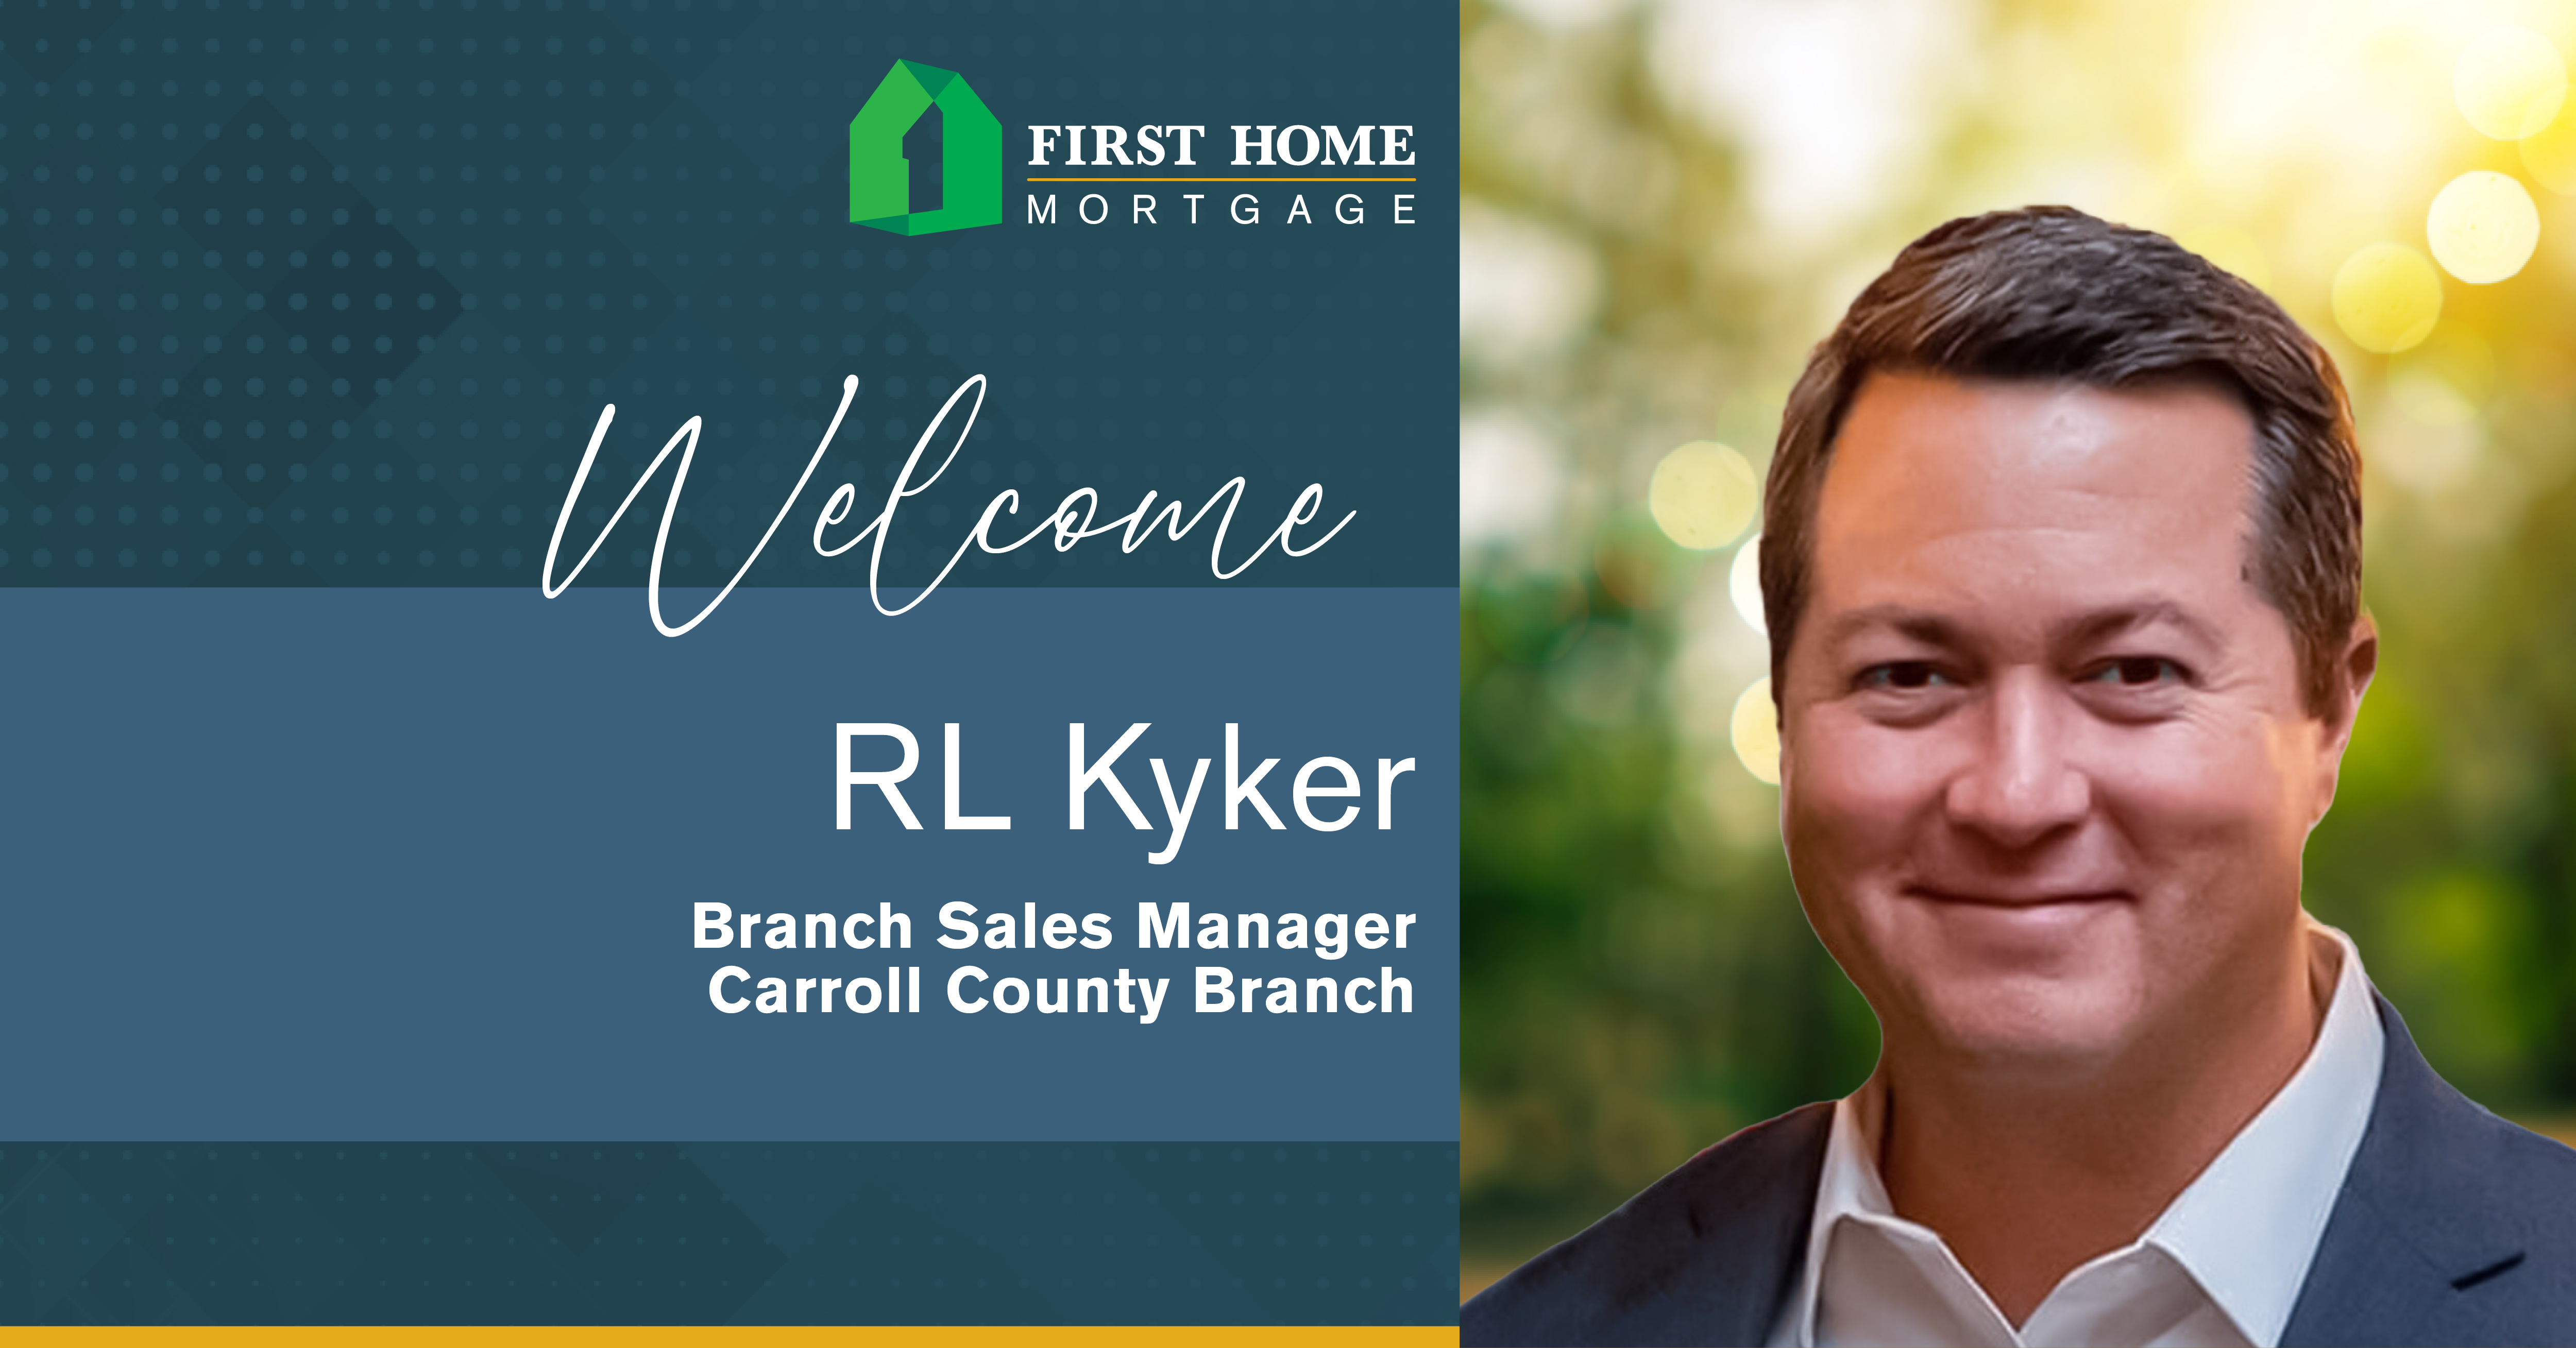 RL Kyker Joins First Home Mortgage to Lead New Branch Office in Carroll County, Maryland